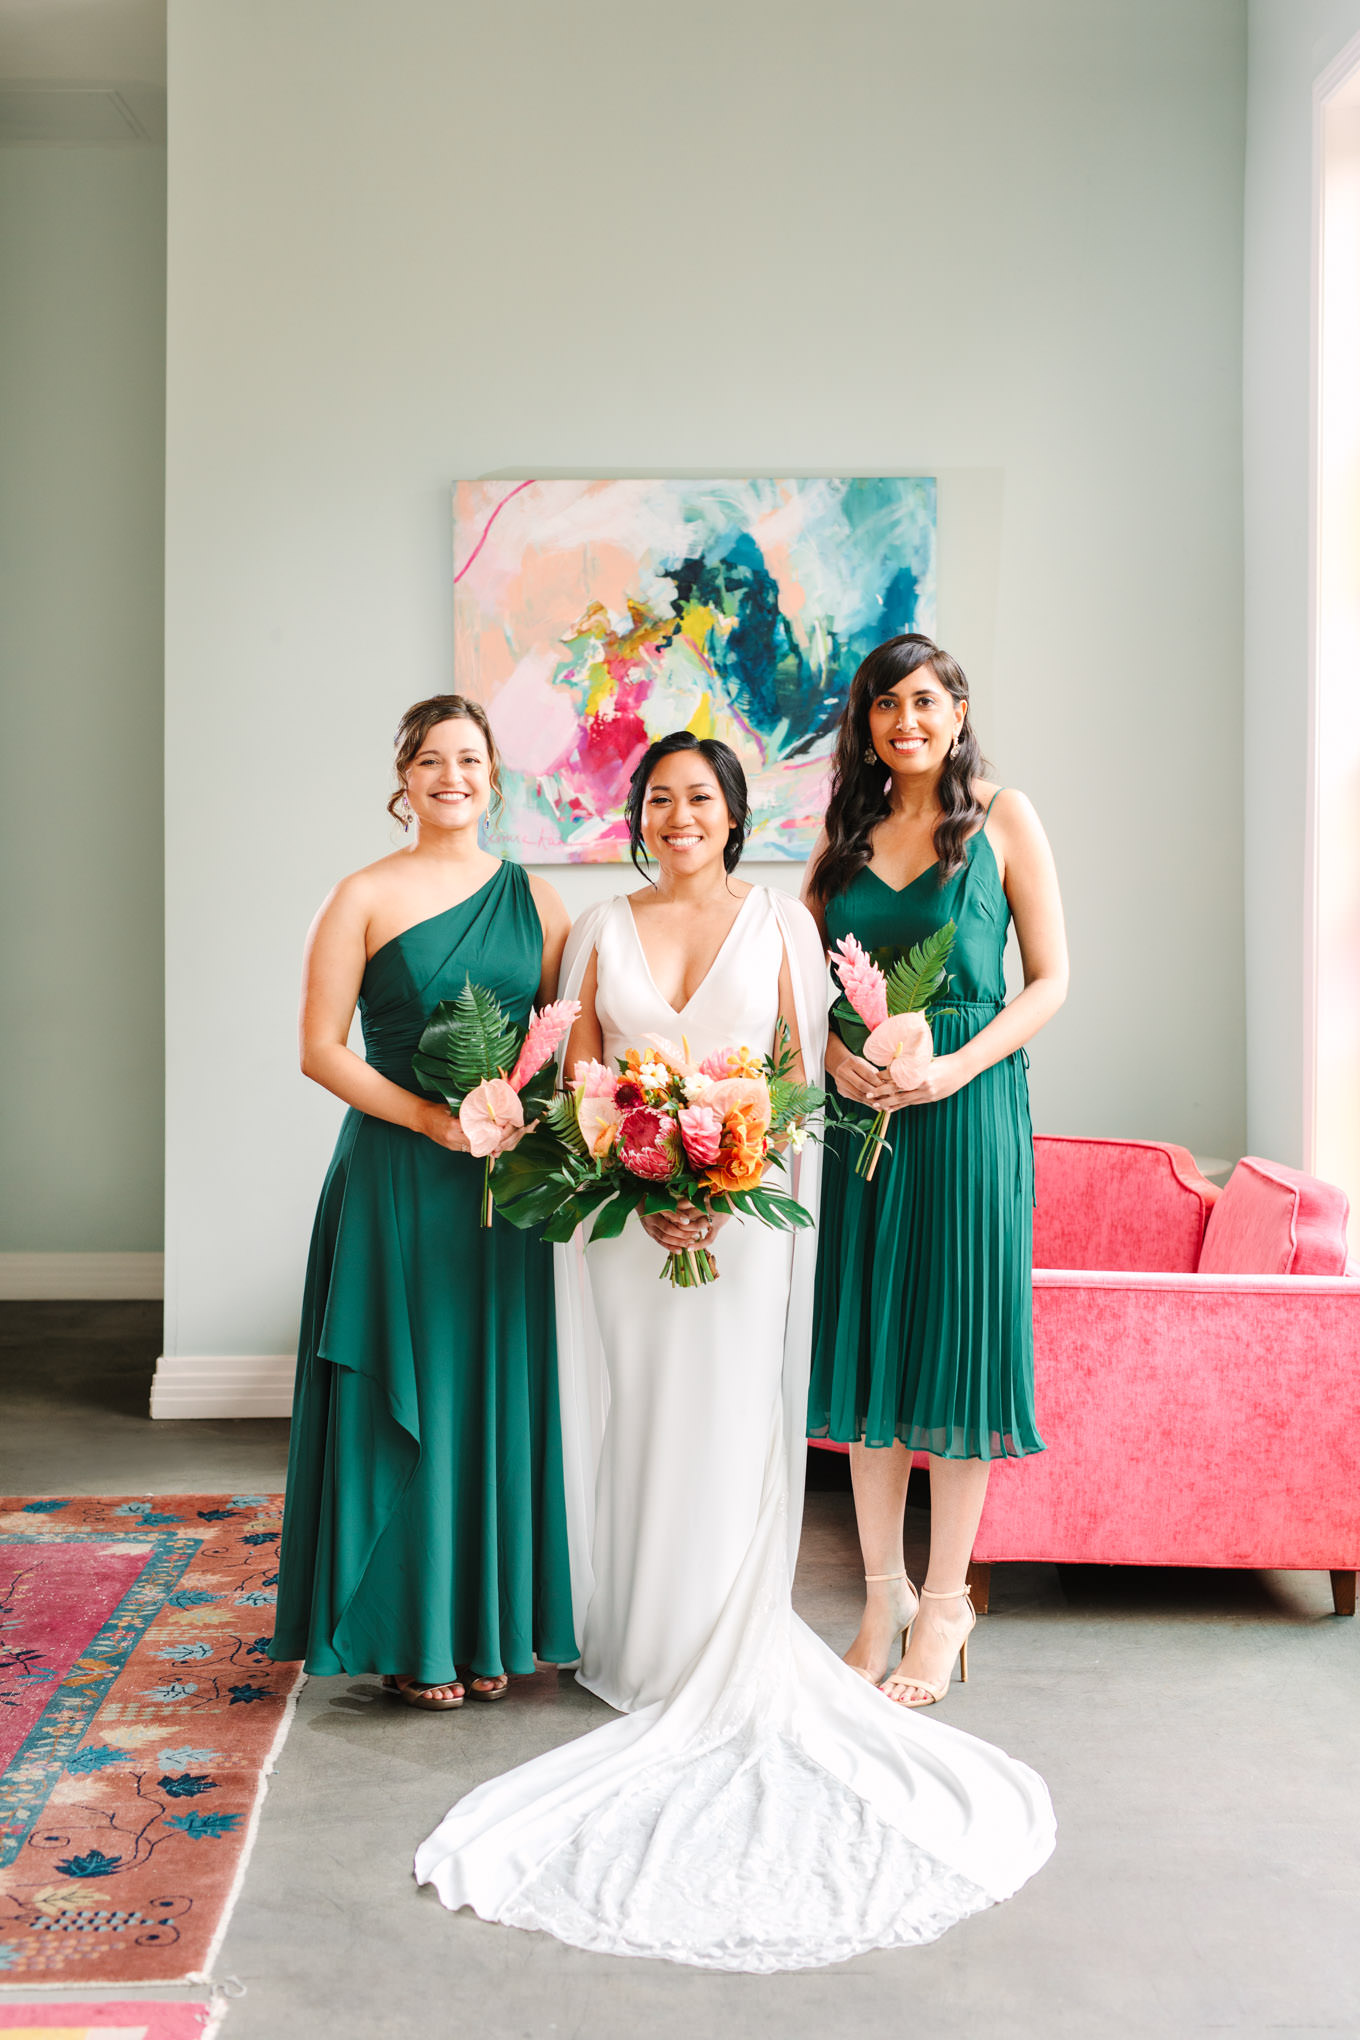 Bride with bridesmaids in green dresses | TV inspired wedding at The Fig House Los Angeles | Published on The Knot | Fresh and colorful photography for fun-loving couples in Southern California | #losangeleswedding #TVwedding #colorfulwedding #theknot   Source: Mary Costa Photography | Los Angeles wedding photographer